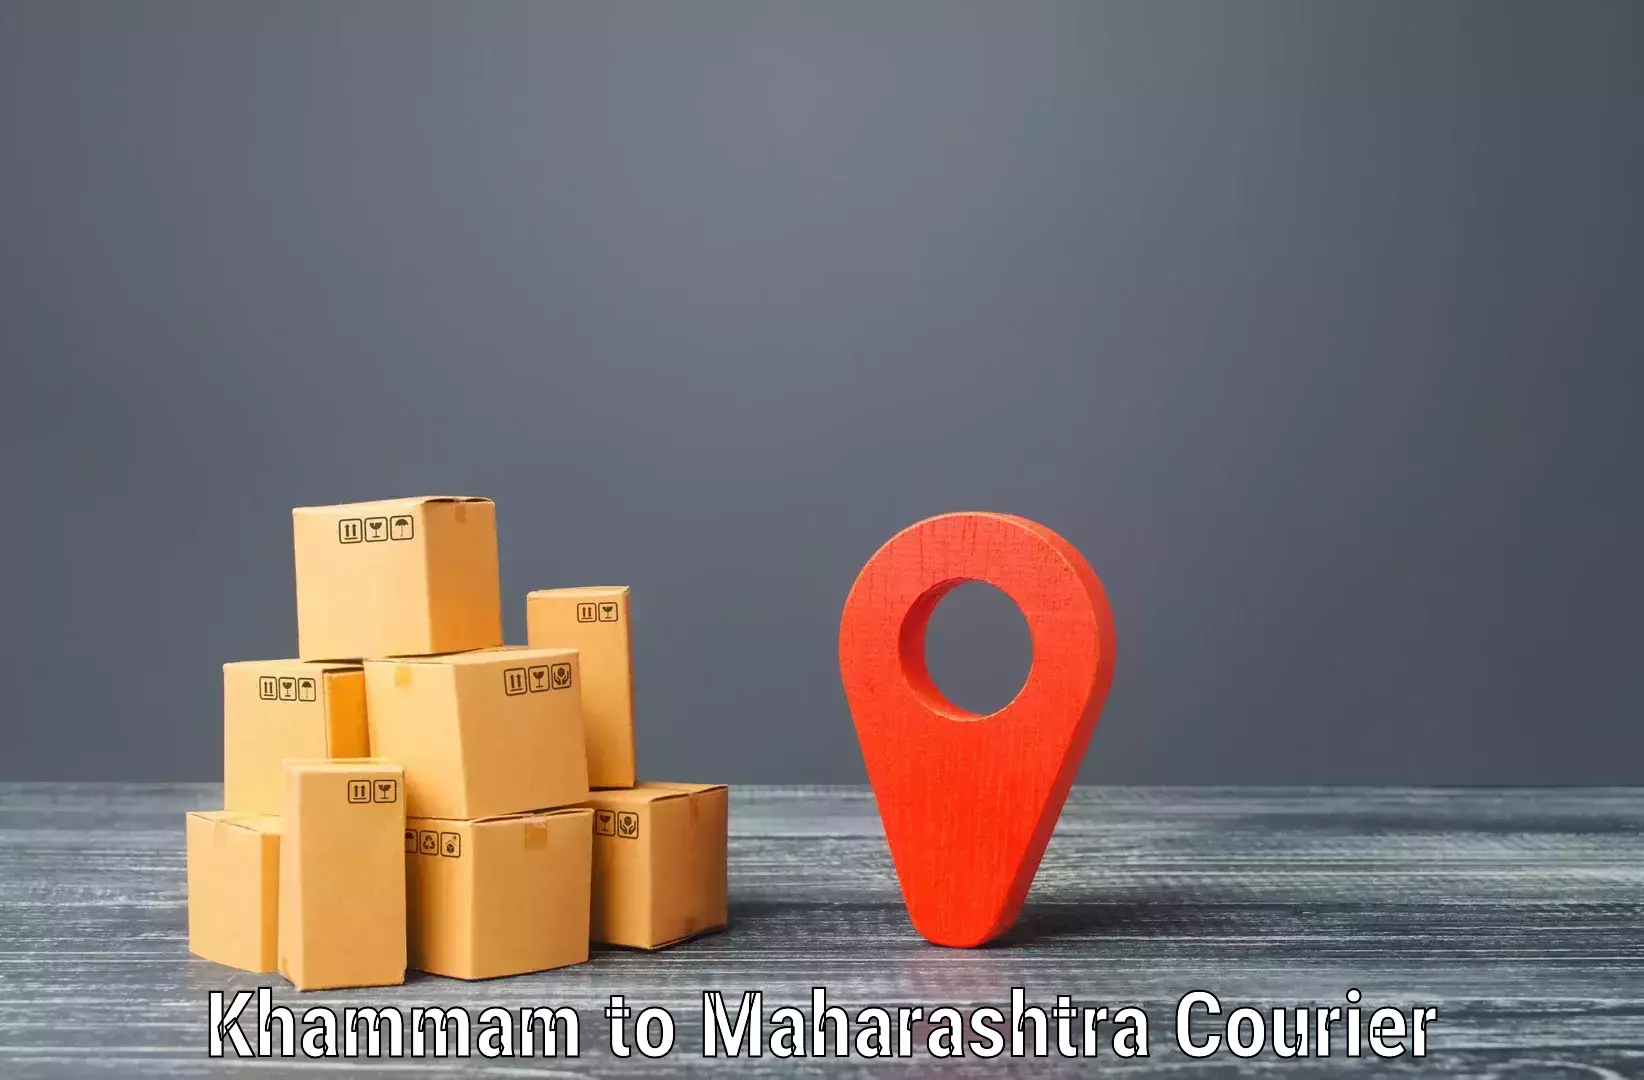 Fast delivery service in Khammam to DY Patil Vidyapeeth Mumbai